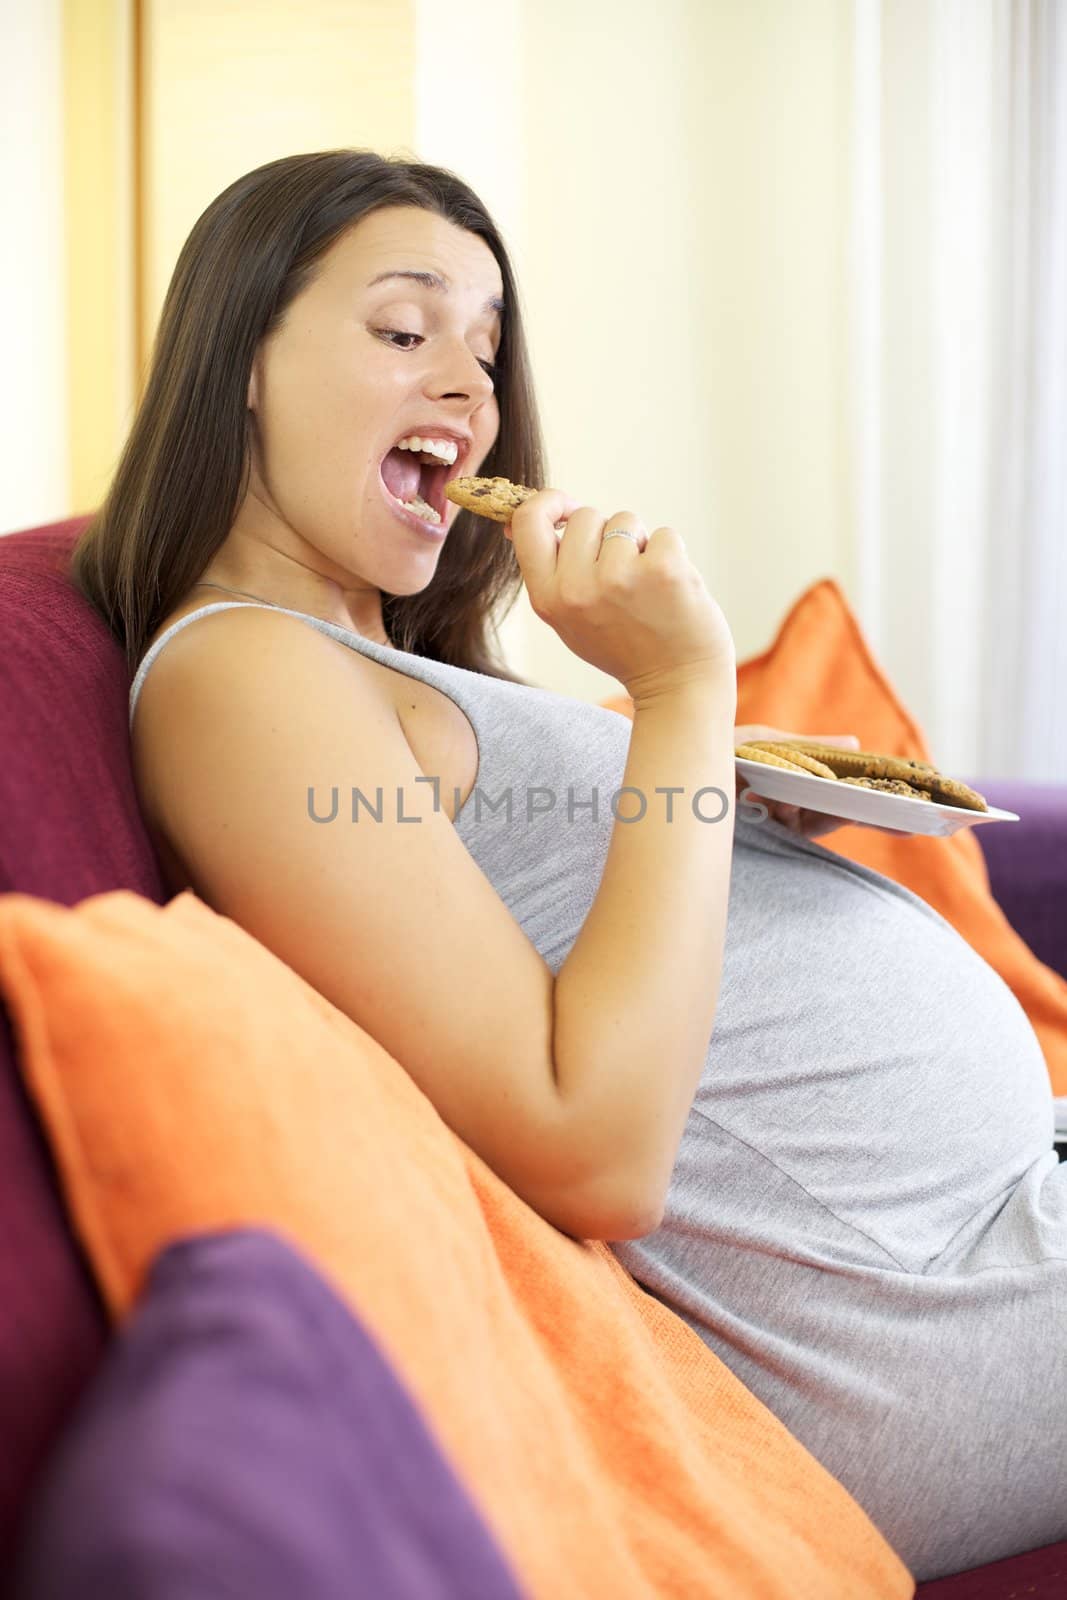 Pregnant woman eating cooky dessert happy by fmarsicano